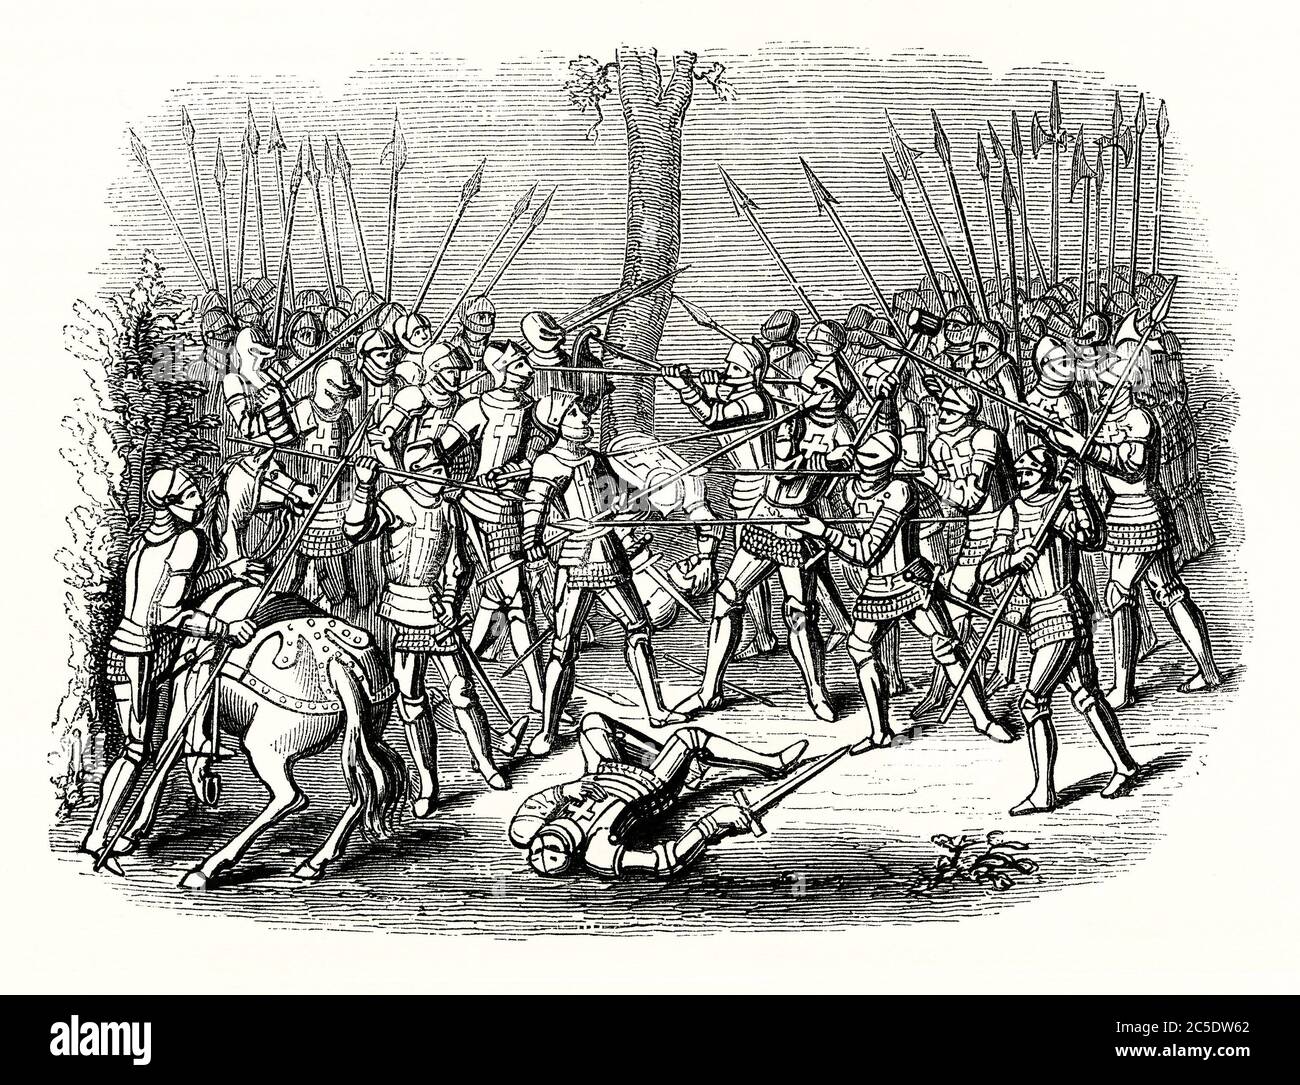 An old engraving showing soldiers or knights in a 'Melee' during the Middle Ages. Melee (or mêlée or melée) is a type of mock combat in medieval tournaments. The 'melee' was where two teams of horsemen or soldiers on foot clashed in formation. The aim was to push their opponents back or break their ranks. The melee or 'buhurt' was the main form of tournament combat during the 12th and 13th centuries before jousting gained popularity. Stock Photo